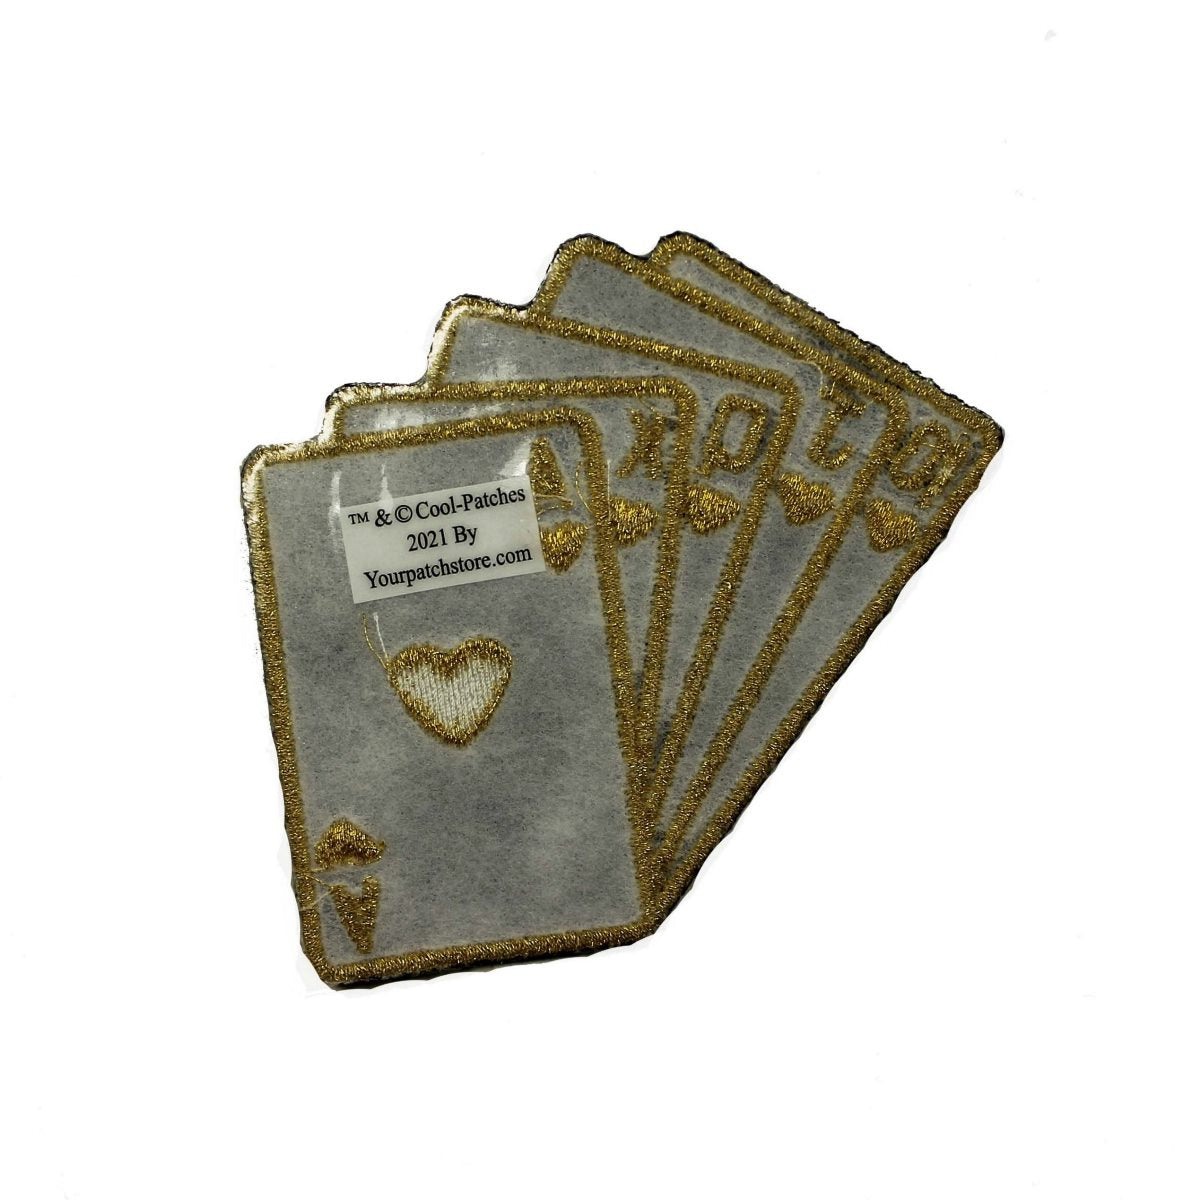 4pc LUXURY INSPIRED CHENILLE SOFT IRON ON PATCHES – My Royal Radiance